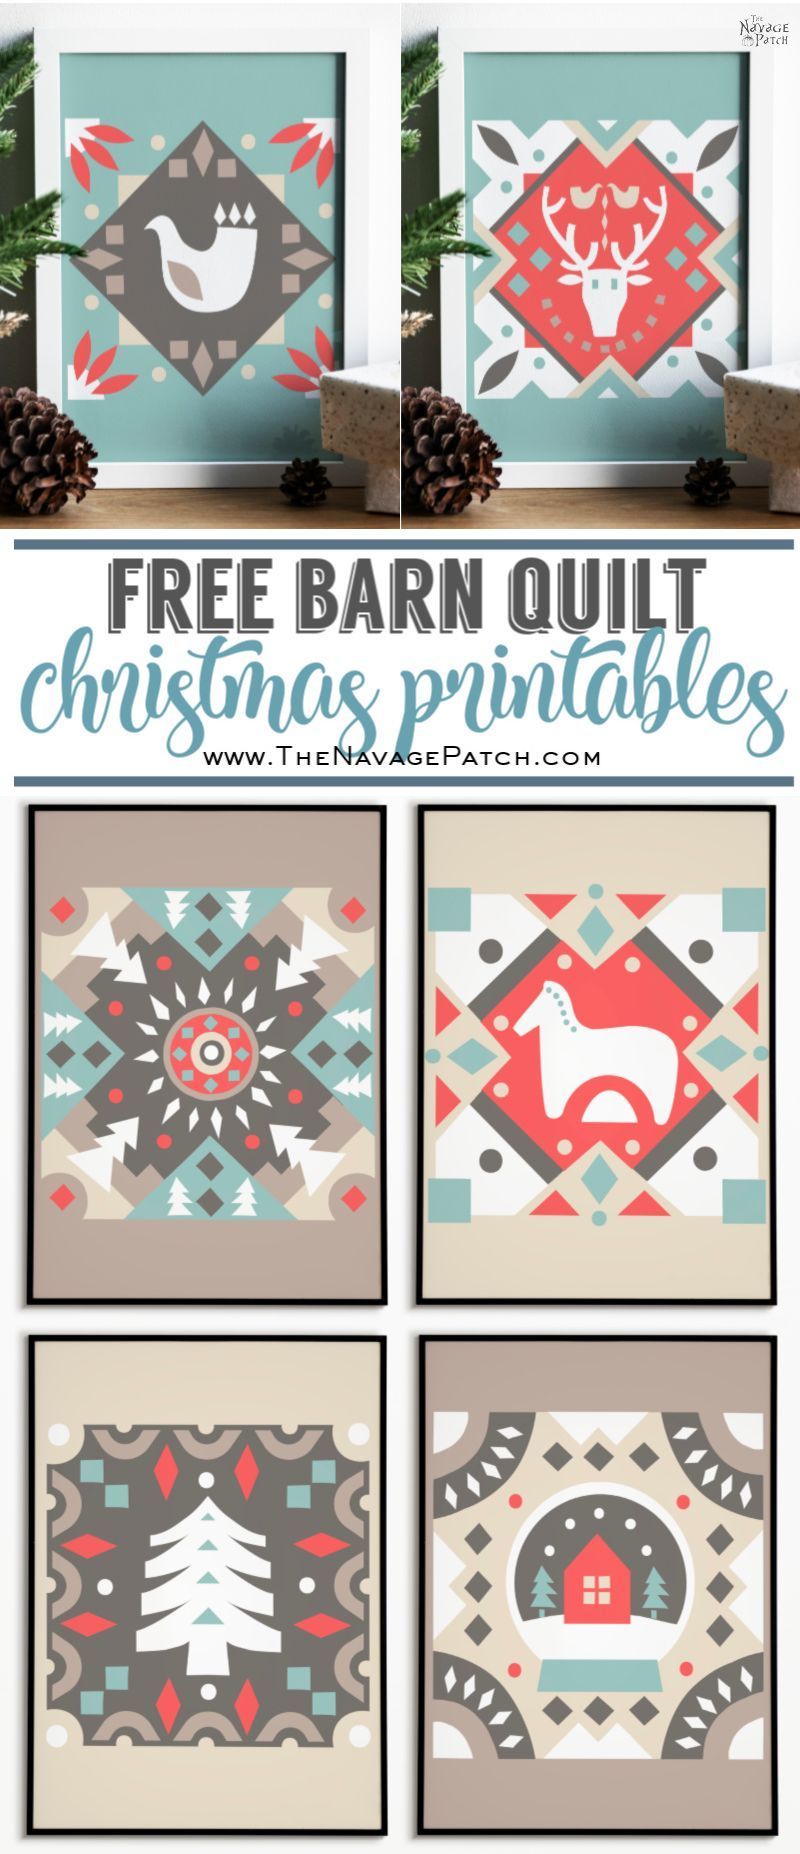 Barn Quilt Christmas Printables by TheNavagePatch.com